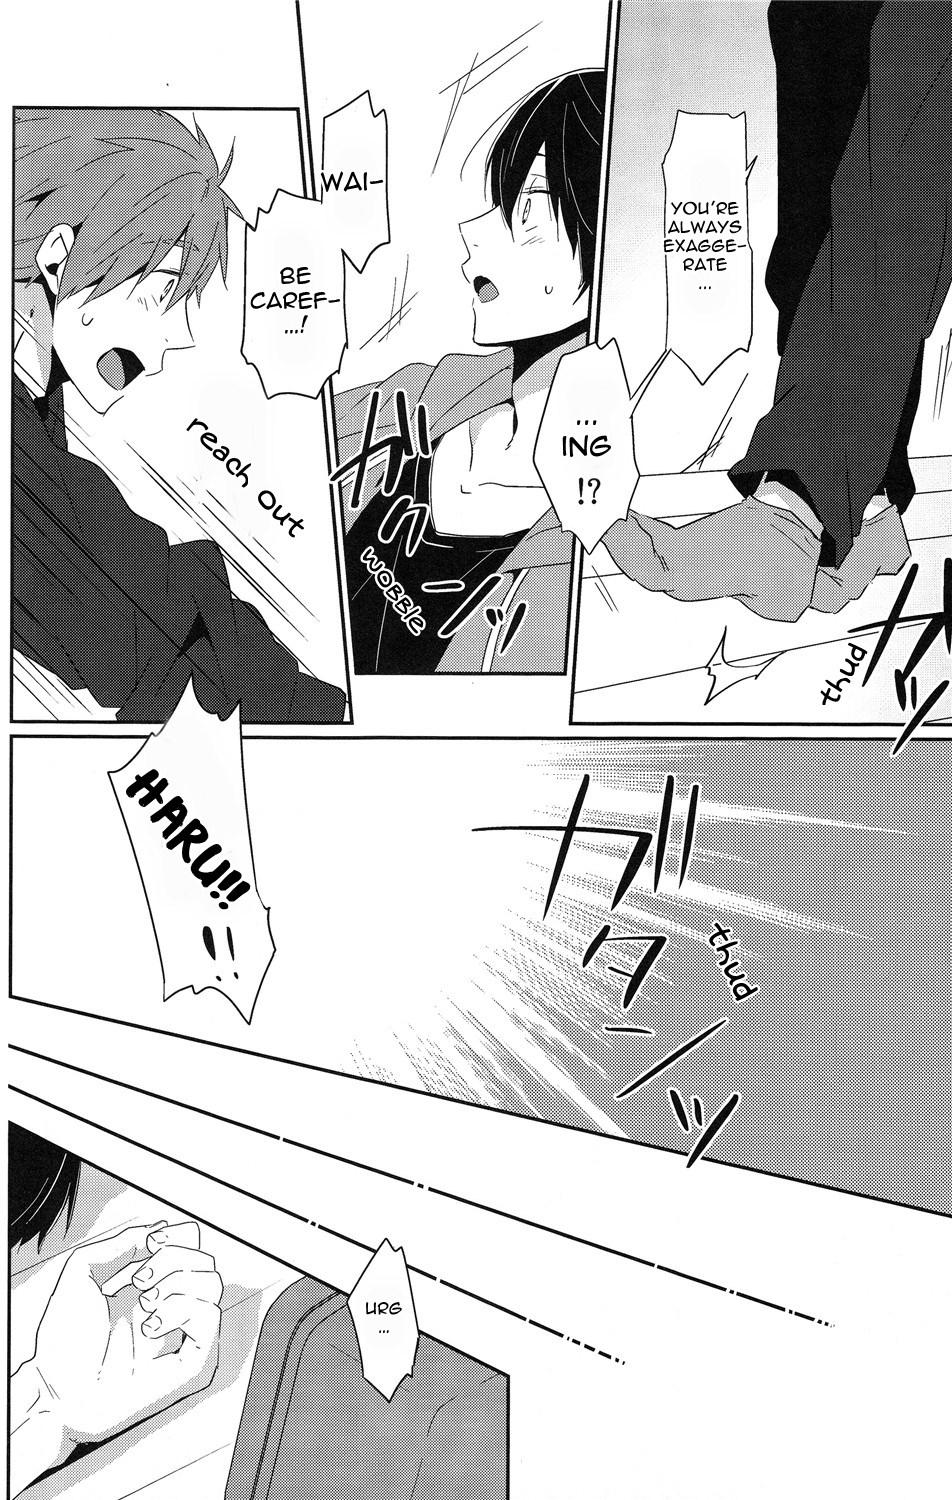 Tight Ass Zenpen Mousou de Ookuri shite orimasu. | All Episodes Brought to You by Imagination. - Free Doggy Style - Page 11